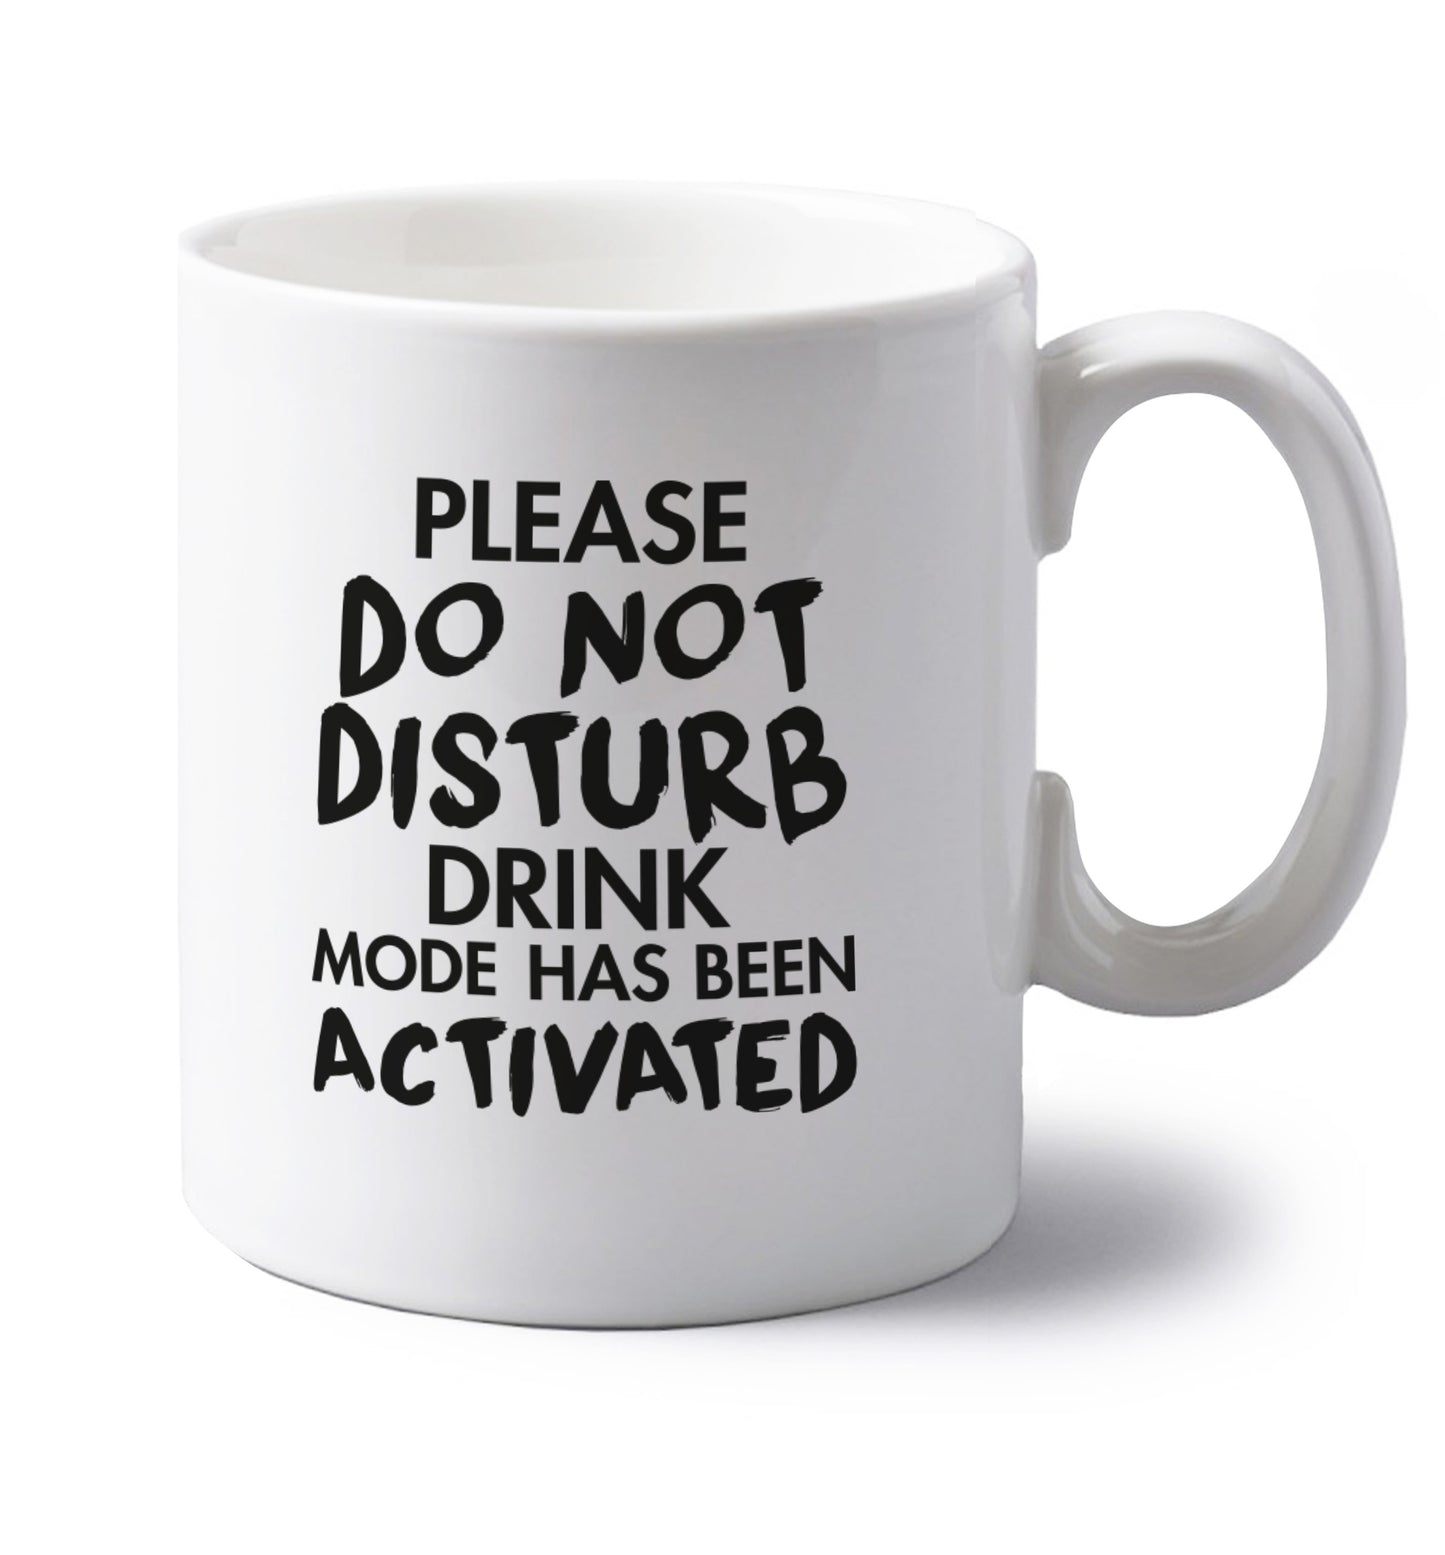 Please do not disturb drink mode has been activated left handed white ceramic mug 